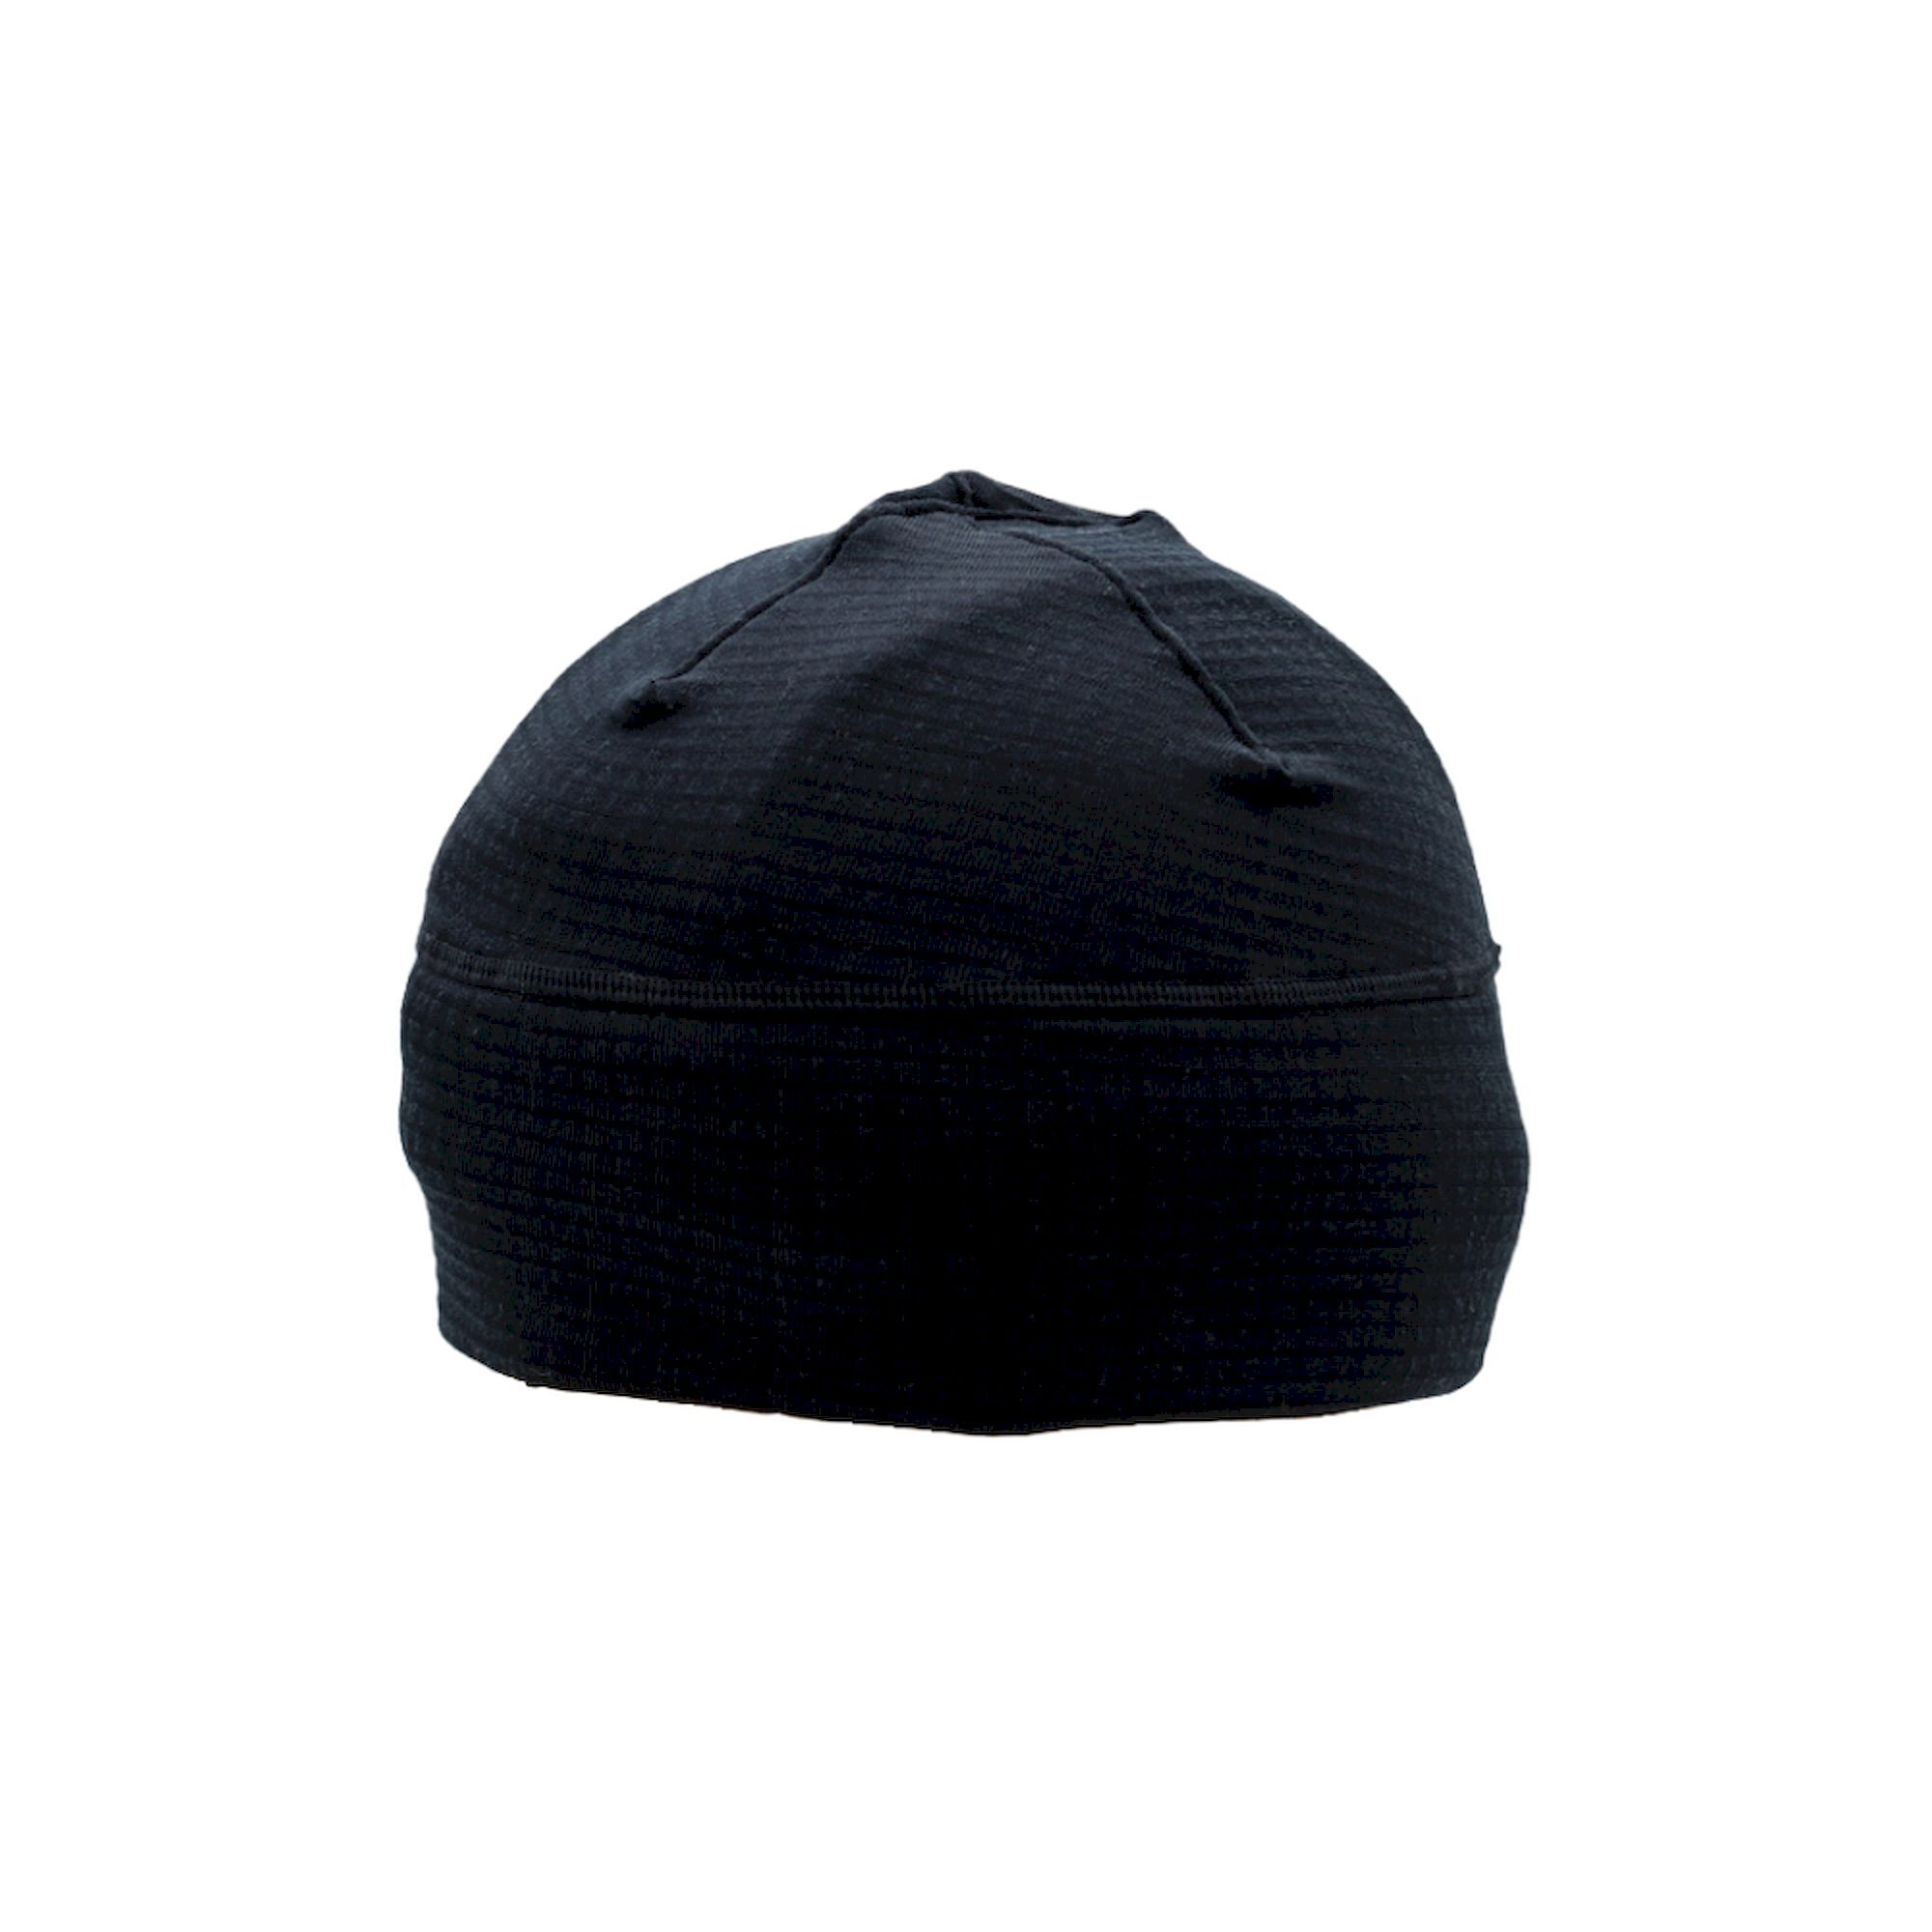 PAG Neckwear Technical Hat - Muts